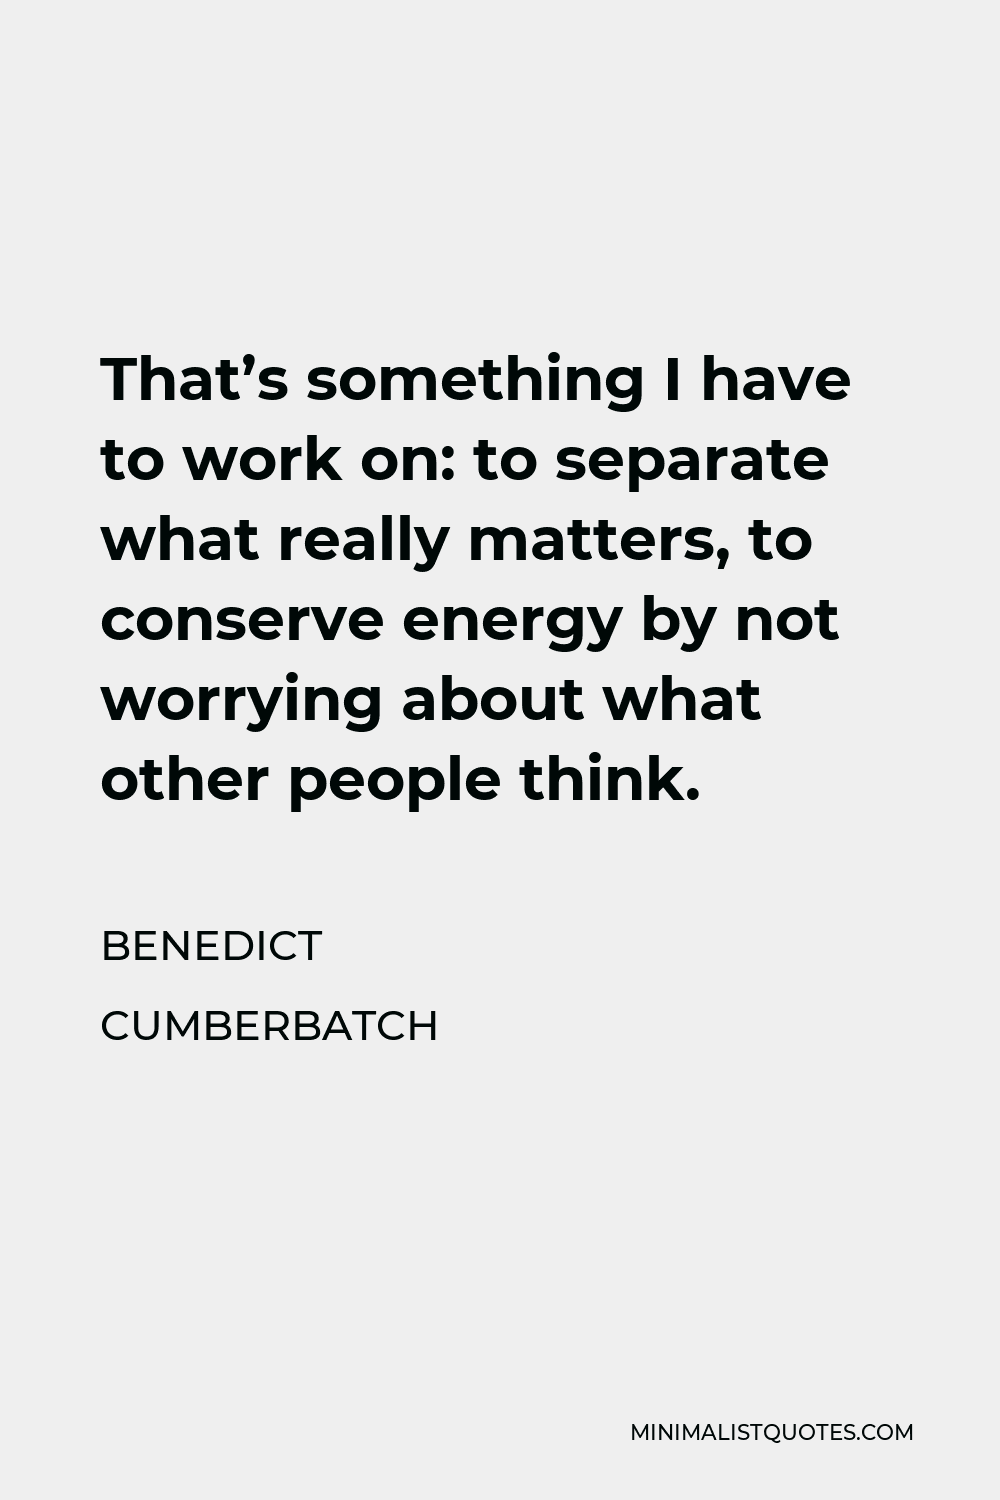 Benedict Cumberbatch Quote - That’s something I have to work on: to separate what really matters, to conserve energy by not worrying about what other people think.